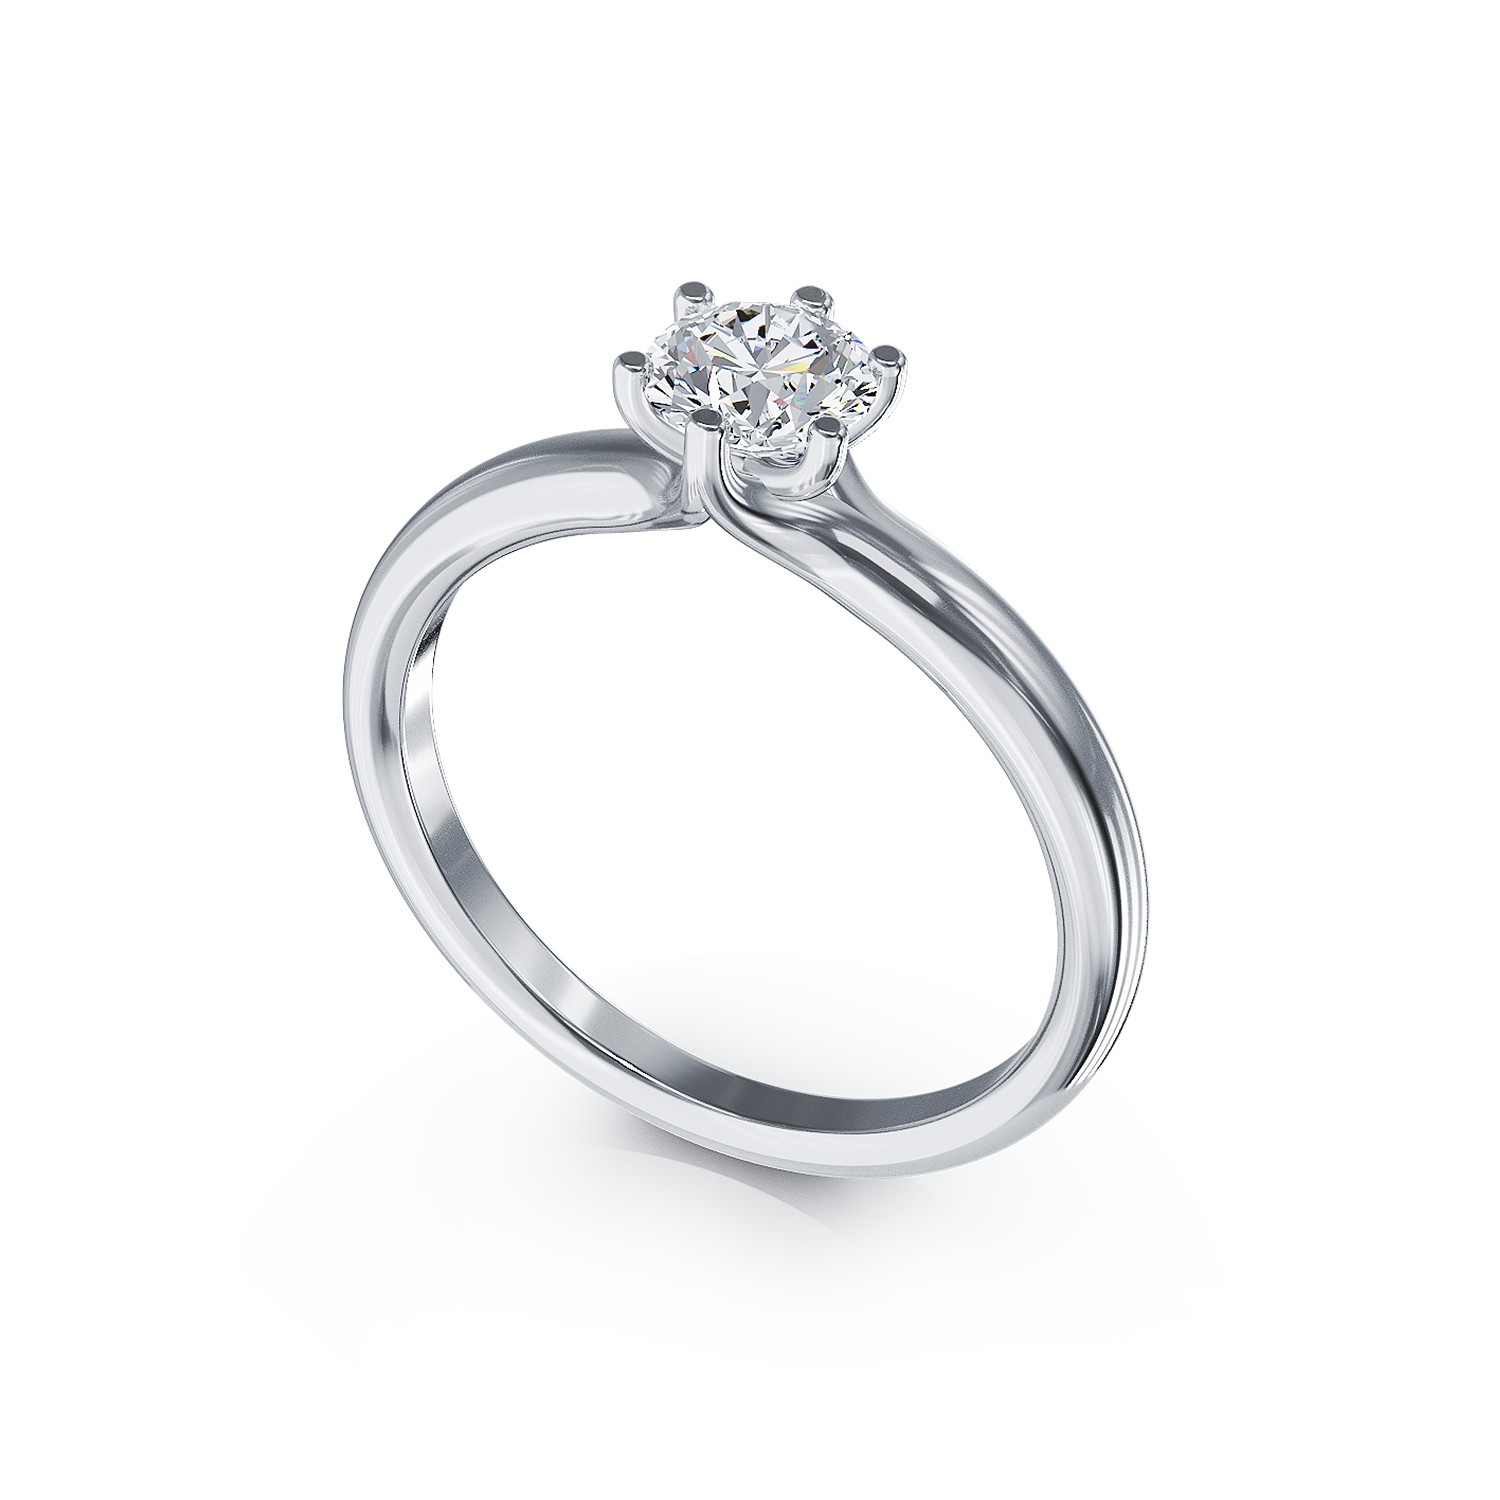 18K white gold engagement ring with a 0.6ct solitaire diamond